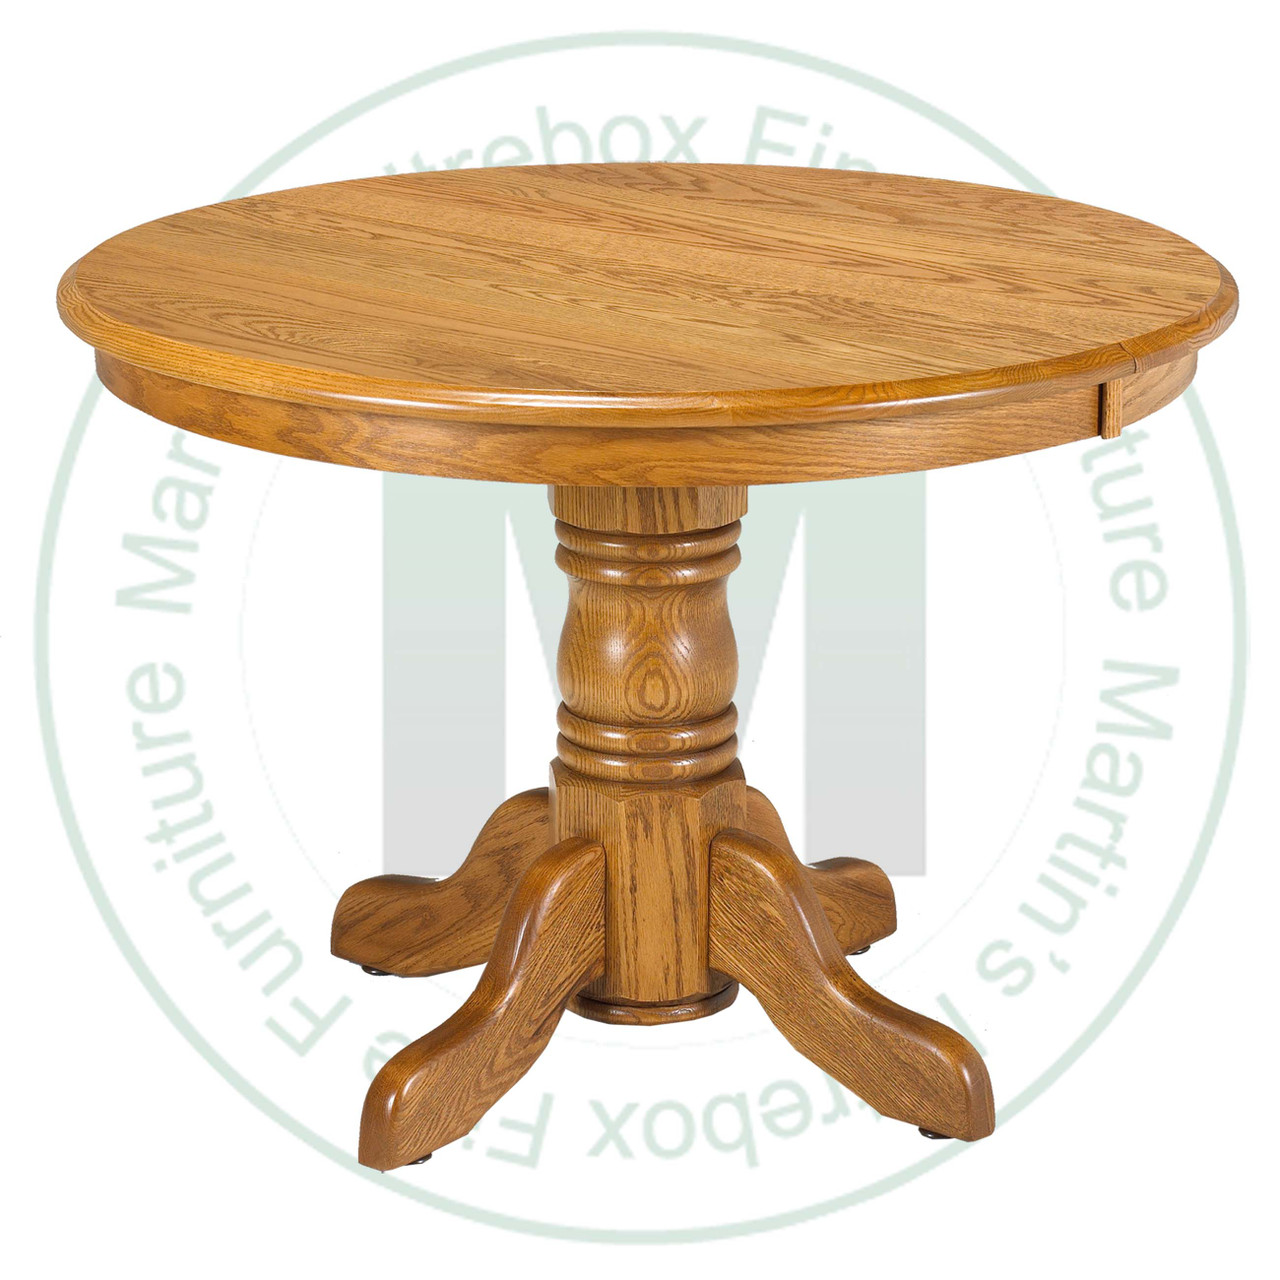 Oak Lancaster Collection Single Pedestal Table 36''D x 48''W x 30''H  Round Solid Table. Table Has 1'' Thick Top